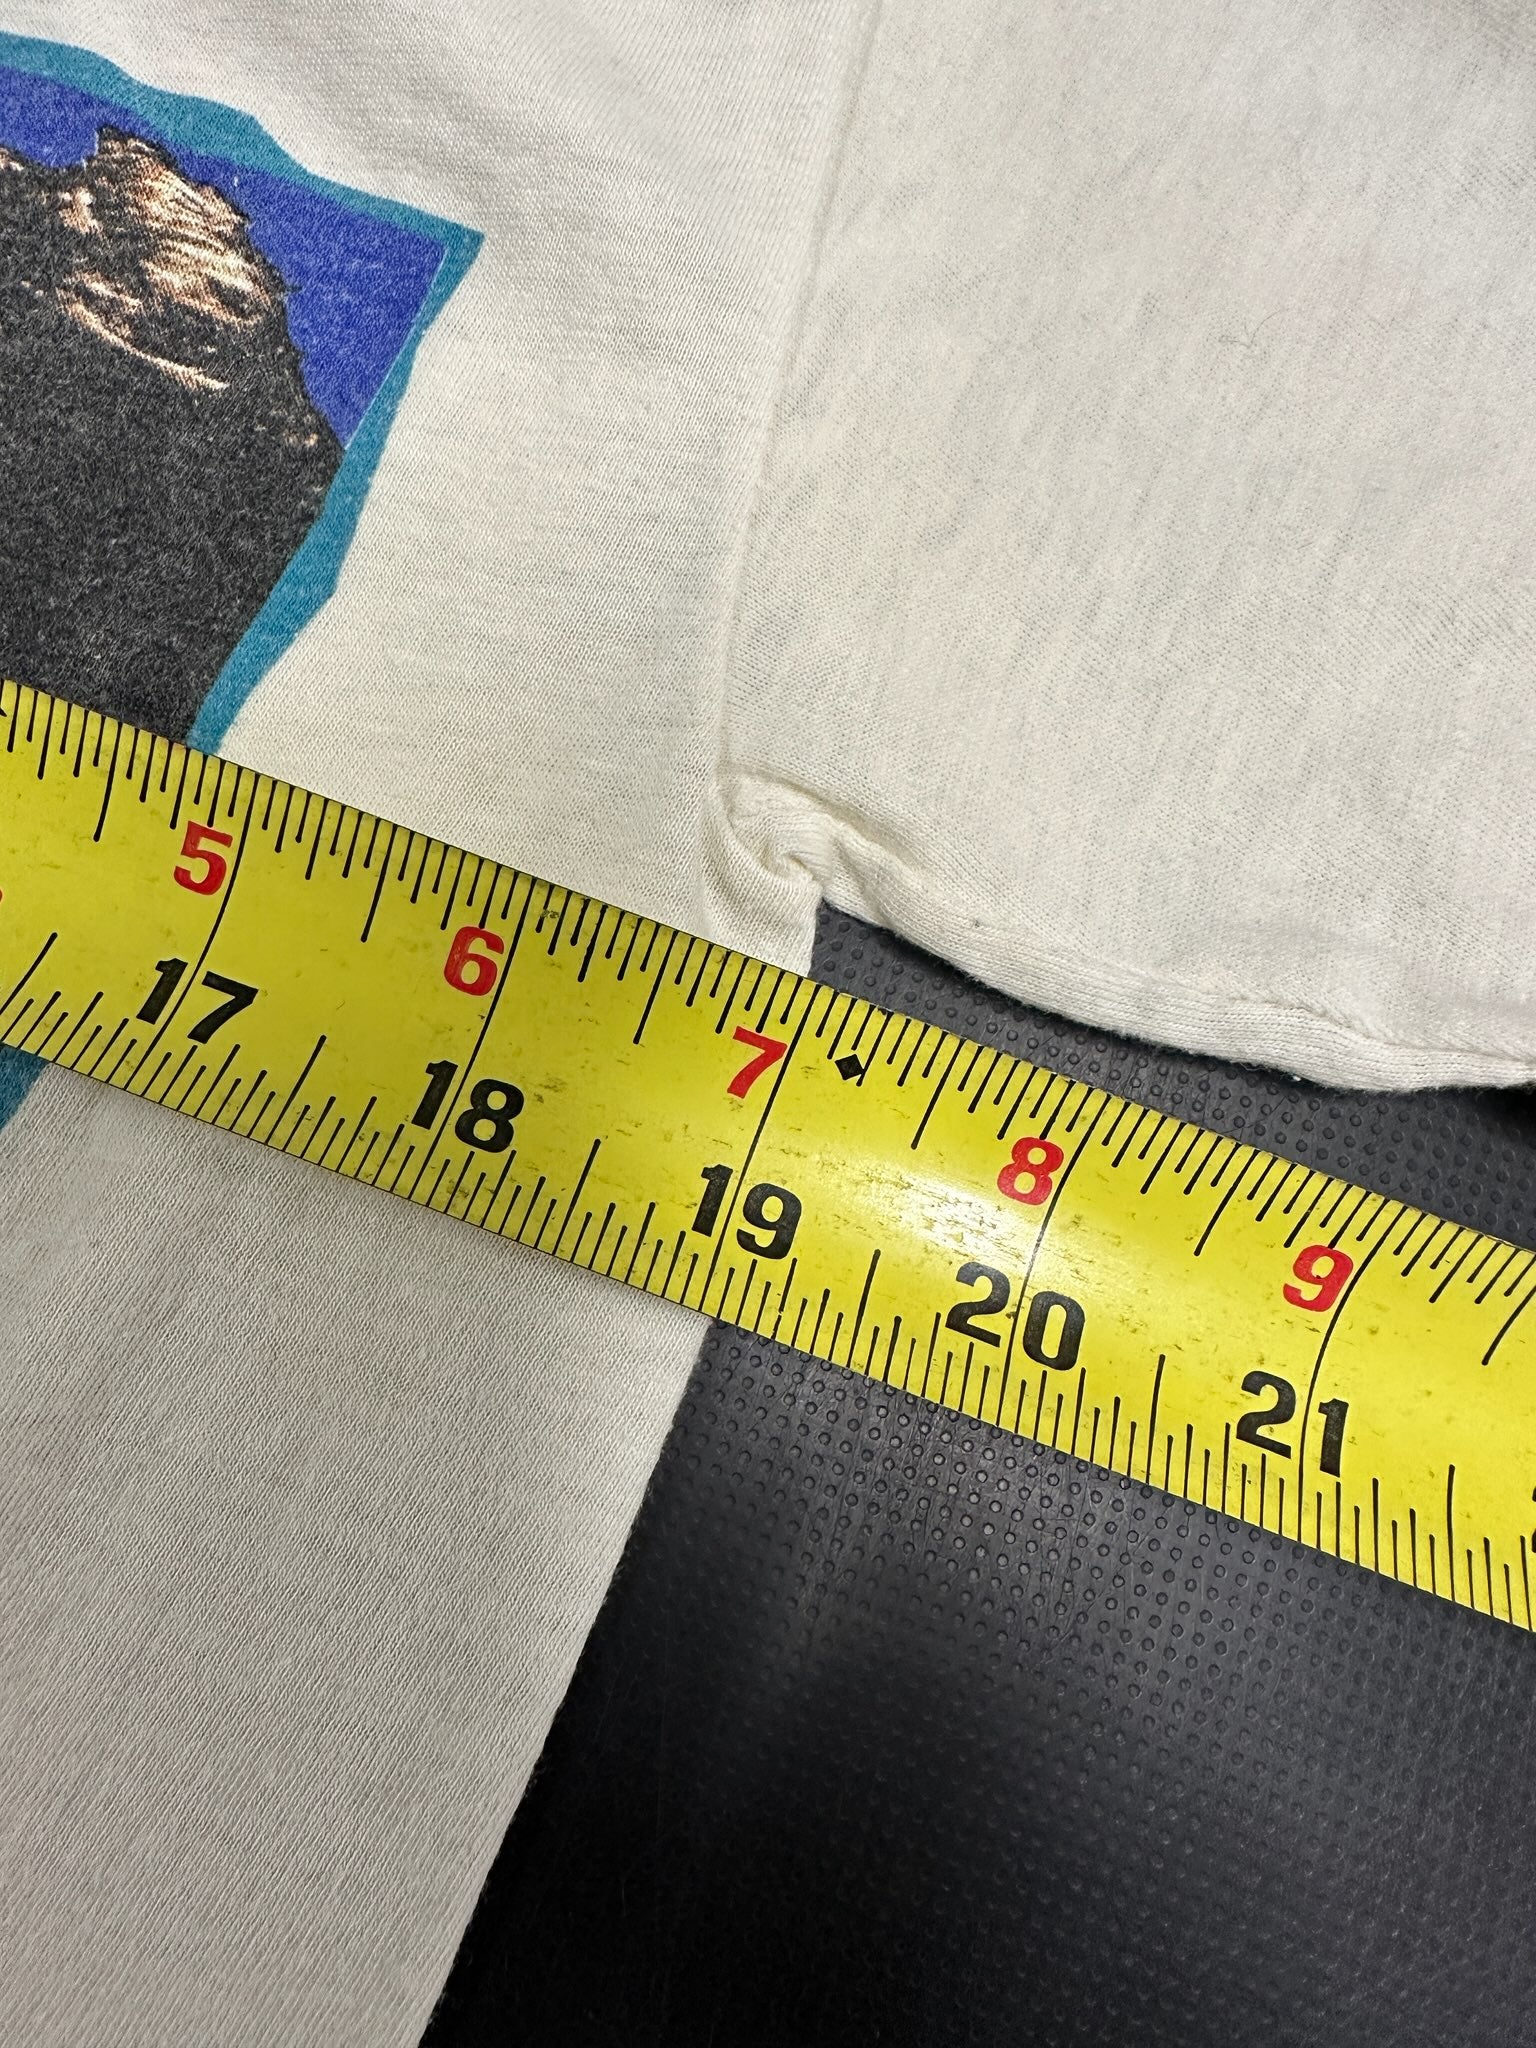 Tesla 1989 Band T-Shirt, White, Tagged L (25.5" Long, 19" Pit To Pit)(Blemish On Front; See Pics)